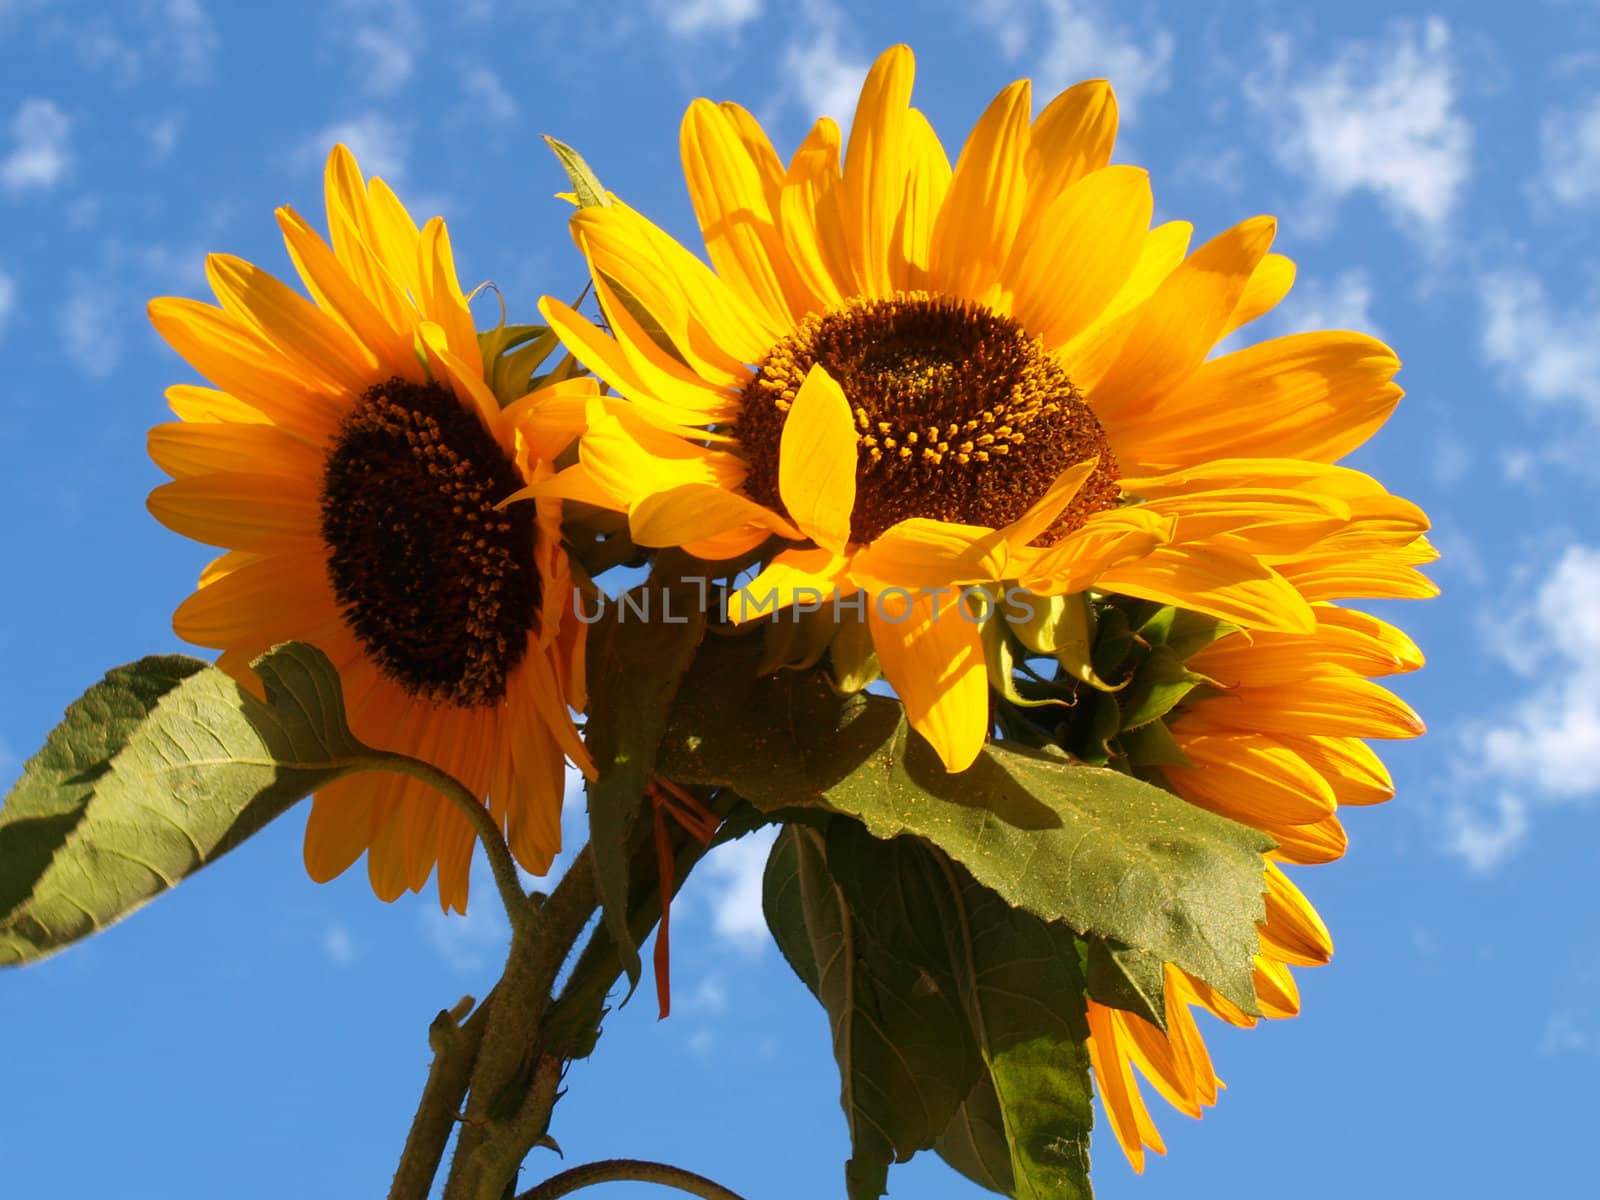 sunflowers and blue sky with white clouds